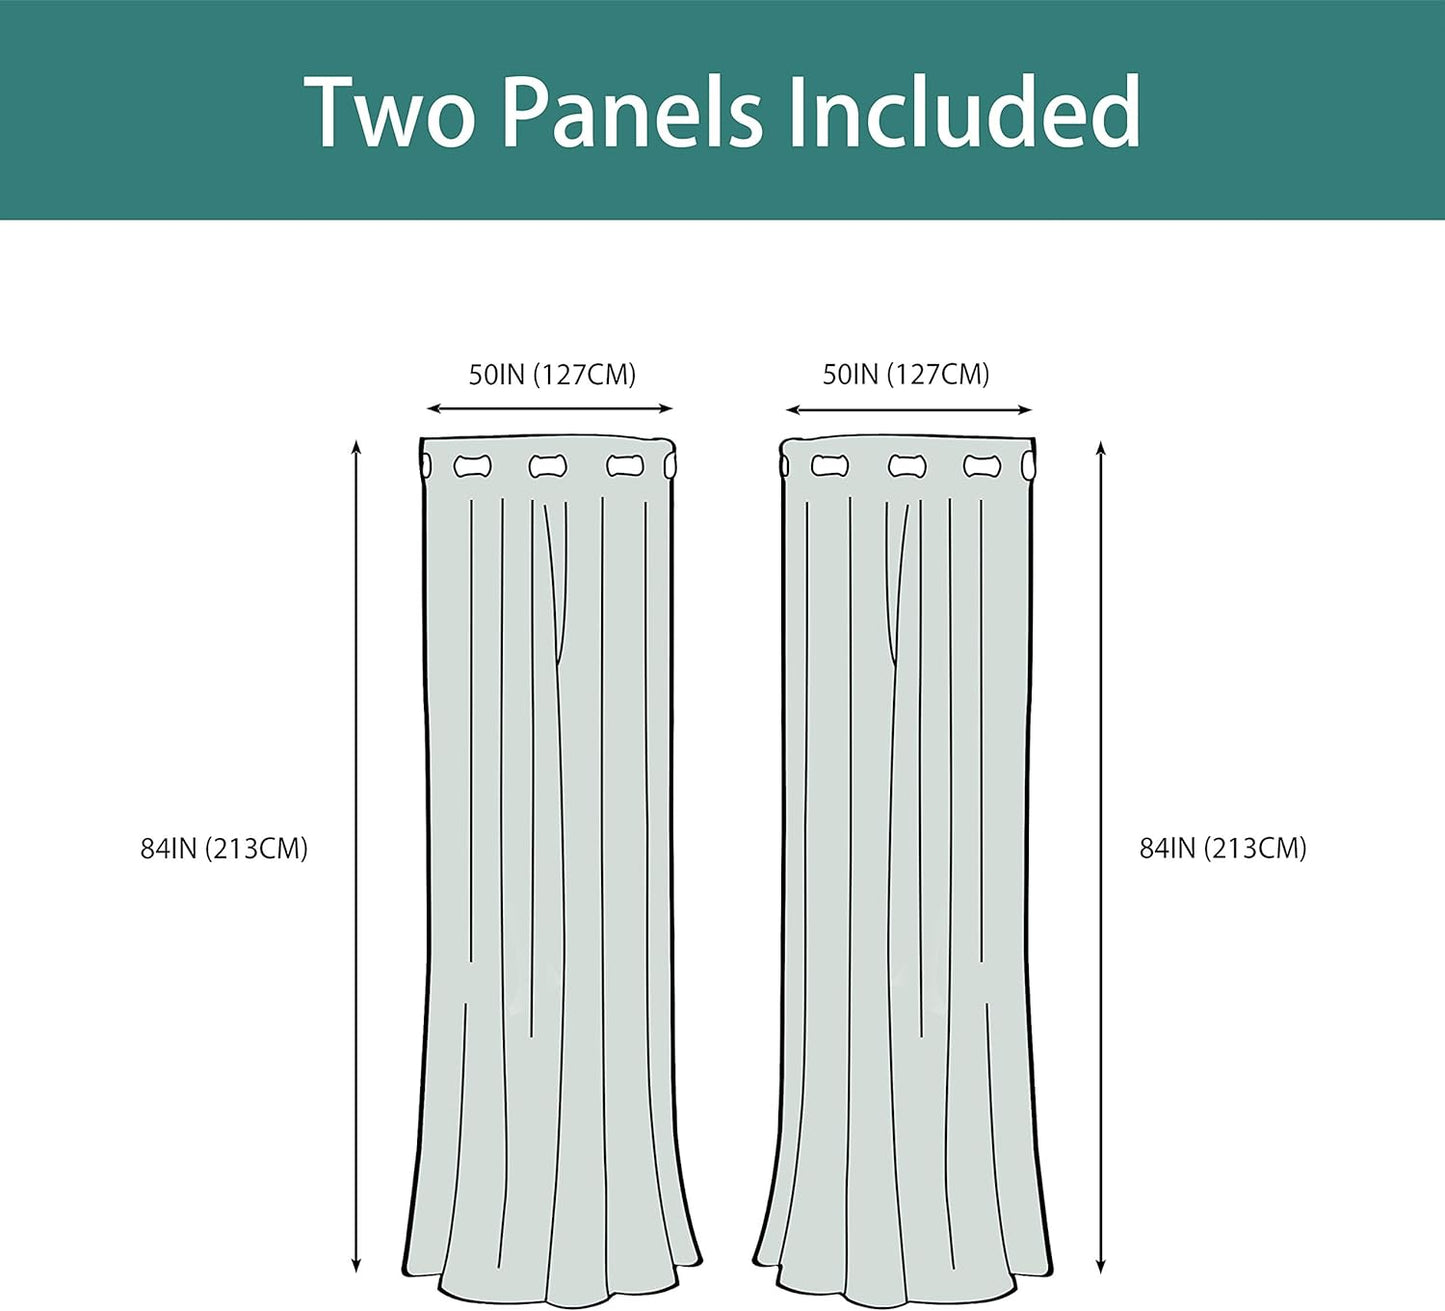 LORDTEX Linen Look Textured Blackout Curtains with Thermal Insulated Liner - Heavy Thick Grommet Window Drapes for Bedroom, 50 X 84 Inches, Ivory, Set of 2 Panels  LORDTEX   